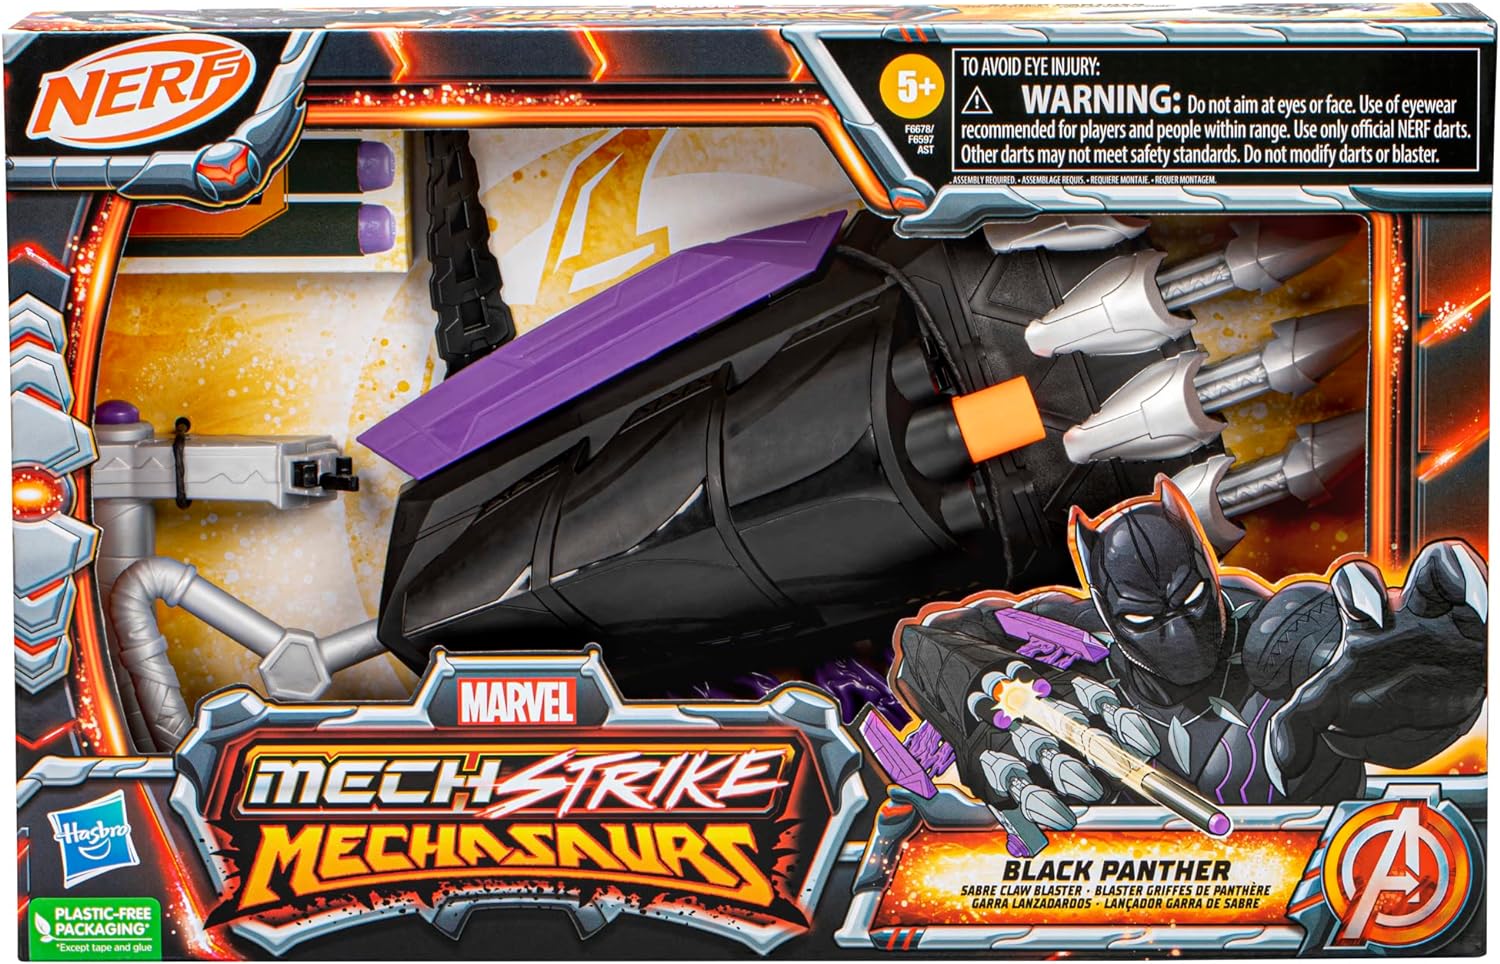 Marvel Mech Strike Mechasaurs Black Panther Sabre Claw Blaster, NERF Blaster with 3 Darts, Role Play Super Hero Toys for Kids Ages 5 and Up